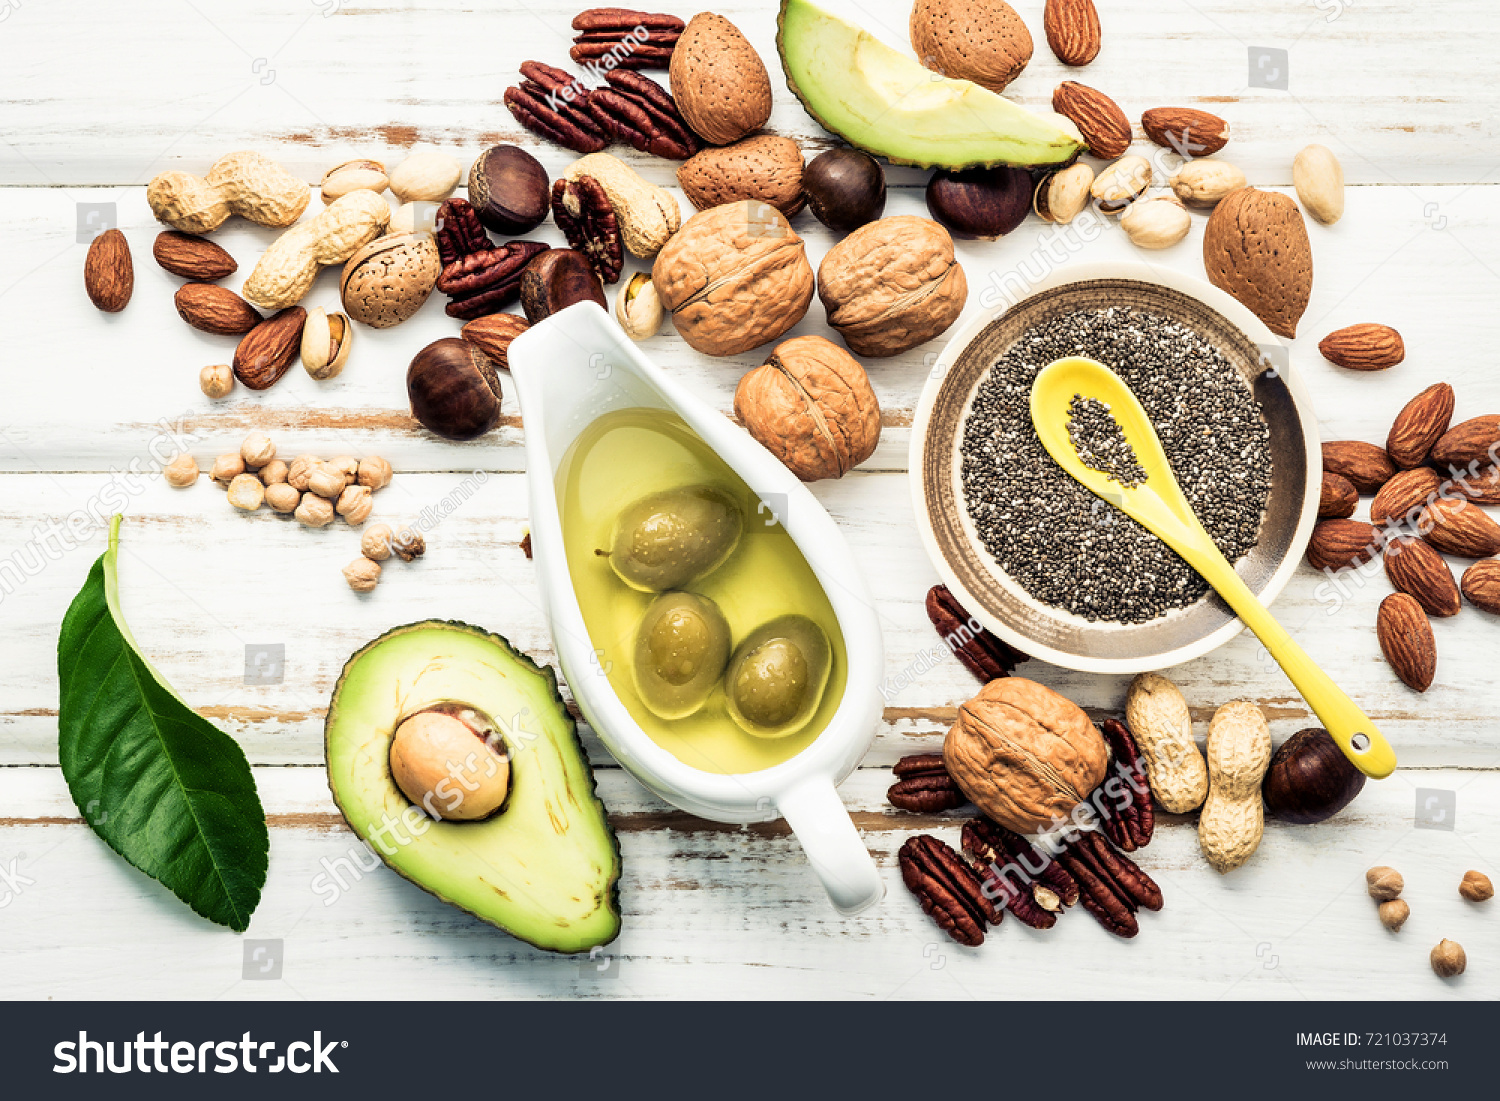 Selection food sources of omega 3 and unsaturated fats. Superfood high vitamin e and dietary fiber for healthy food. Almond ,pecan,hazelnuts,walnuts and olive oil on stone background. #721037374